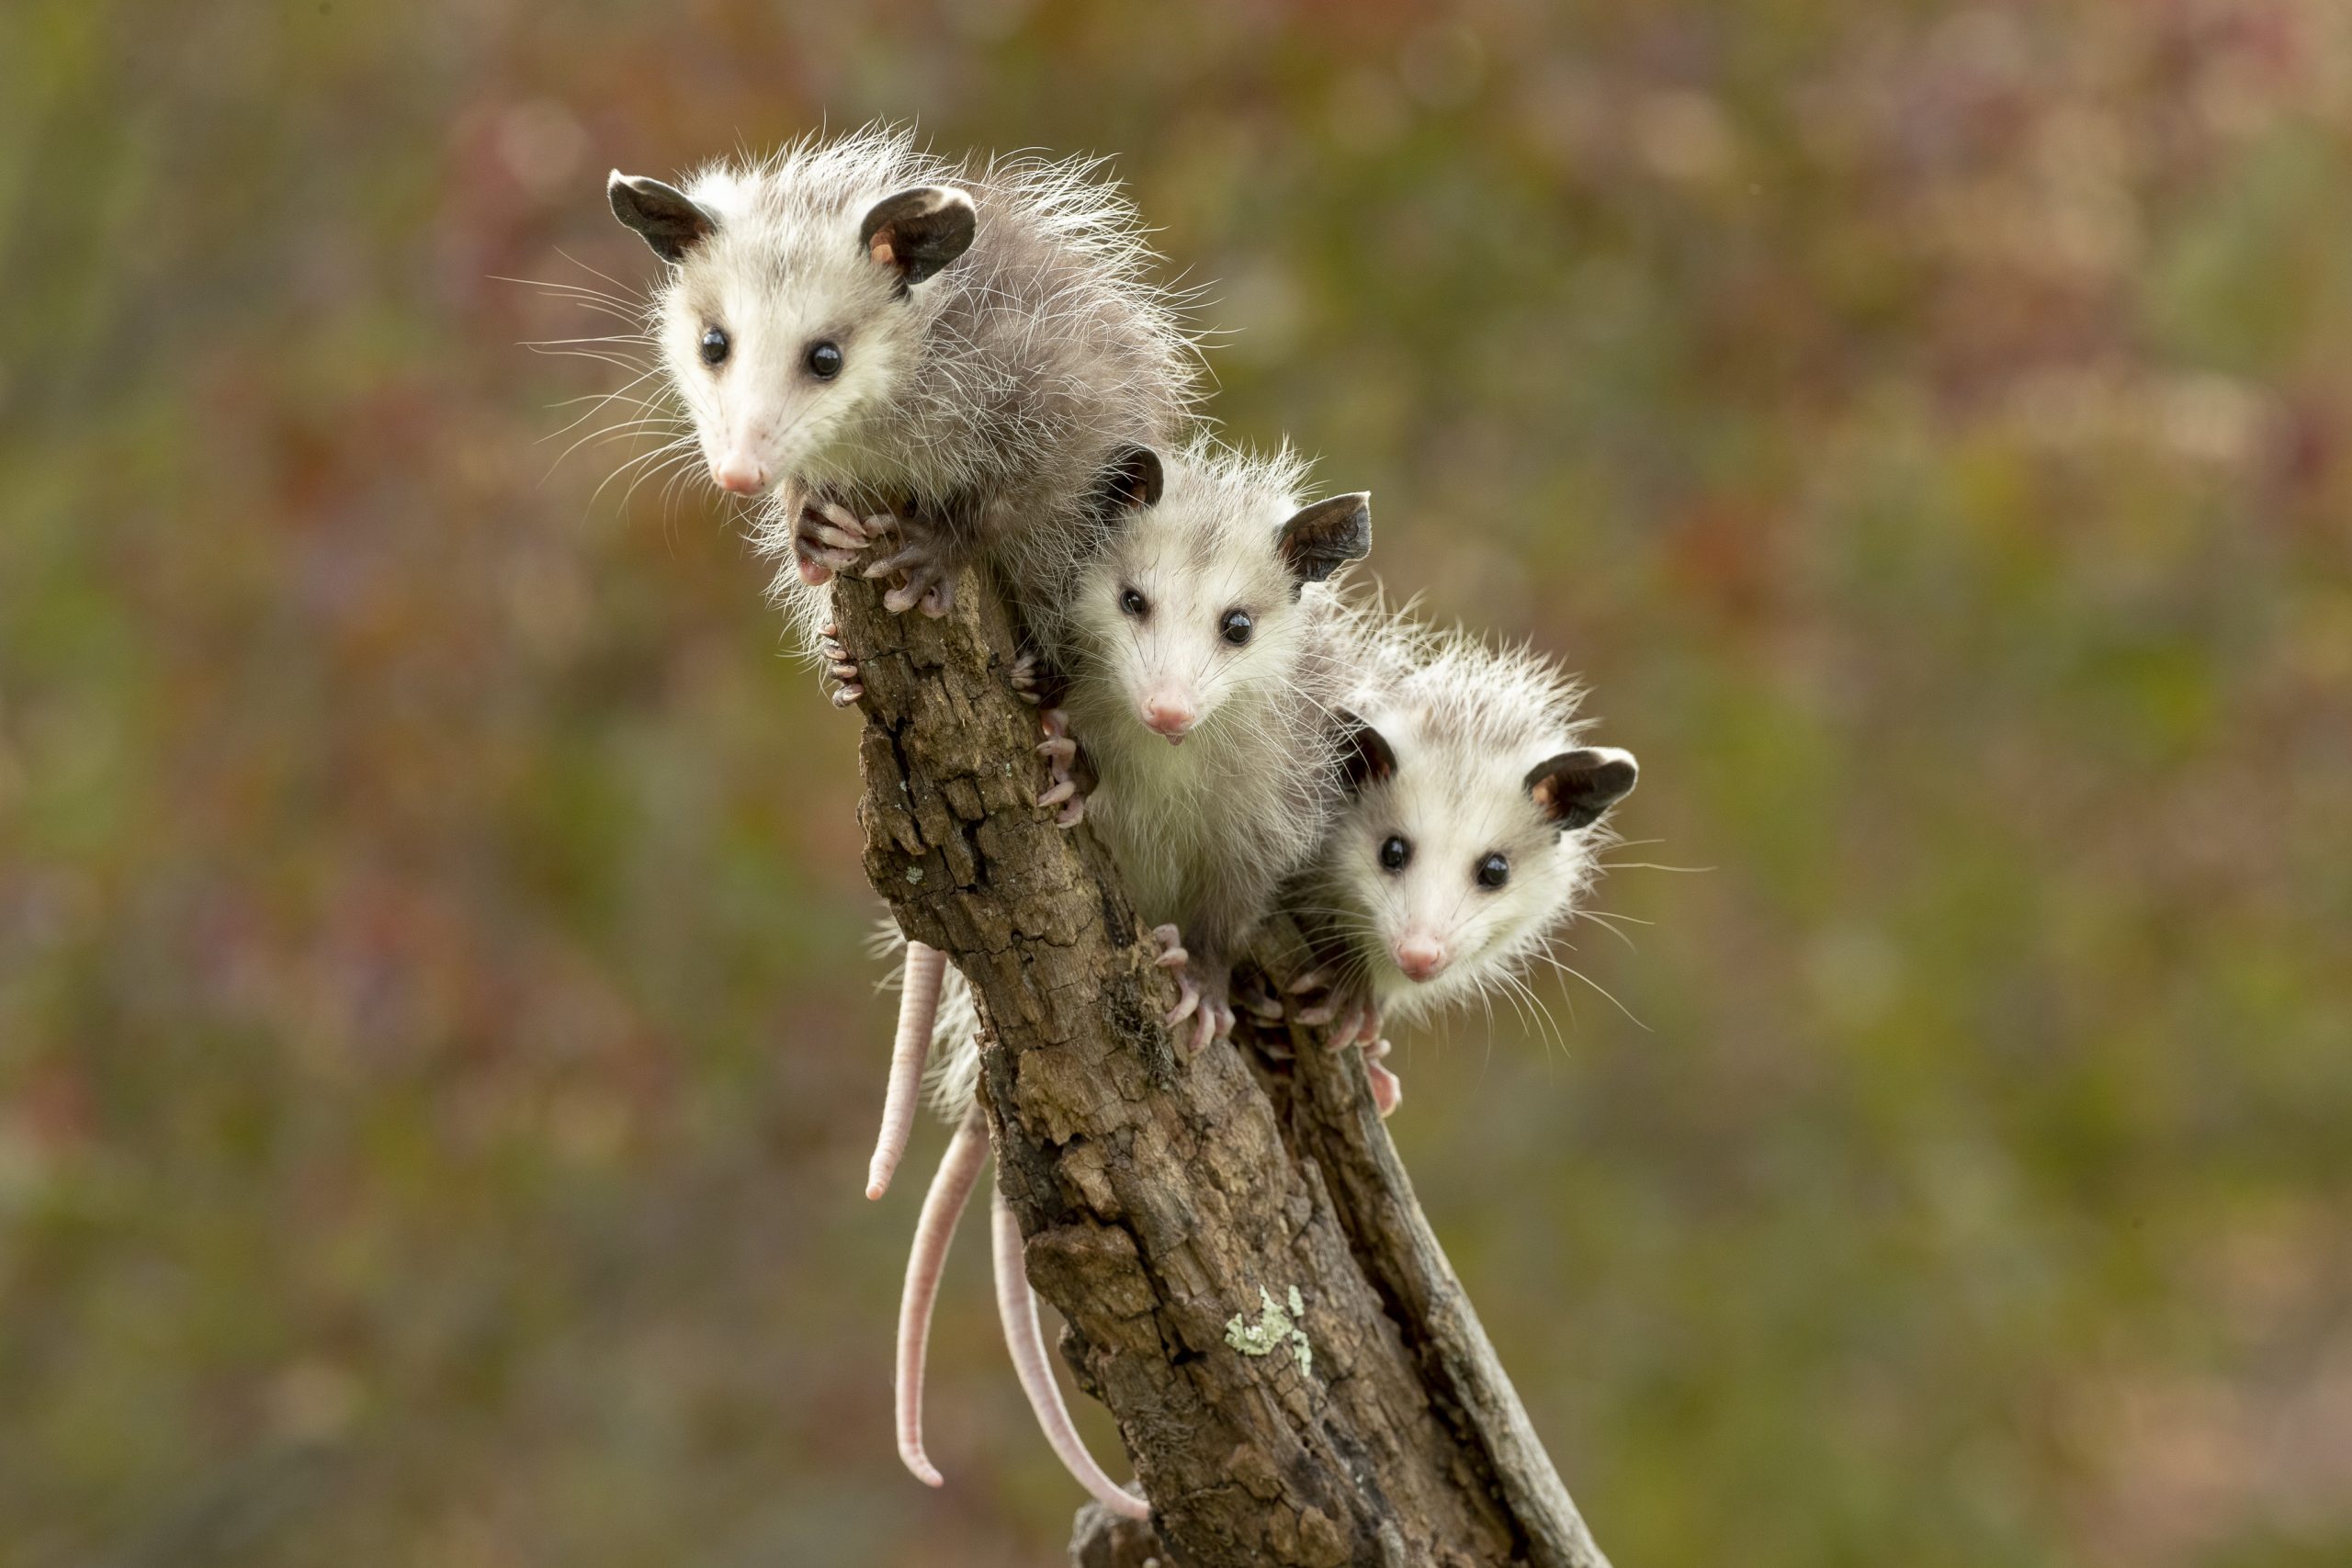 Virginia Opossum babies on stick hanging out